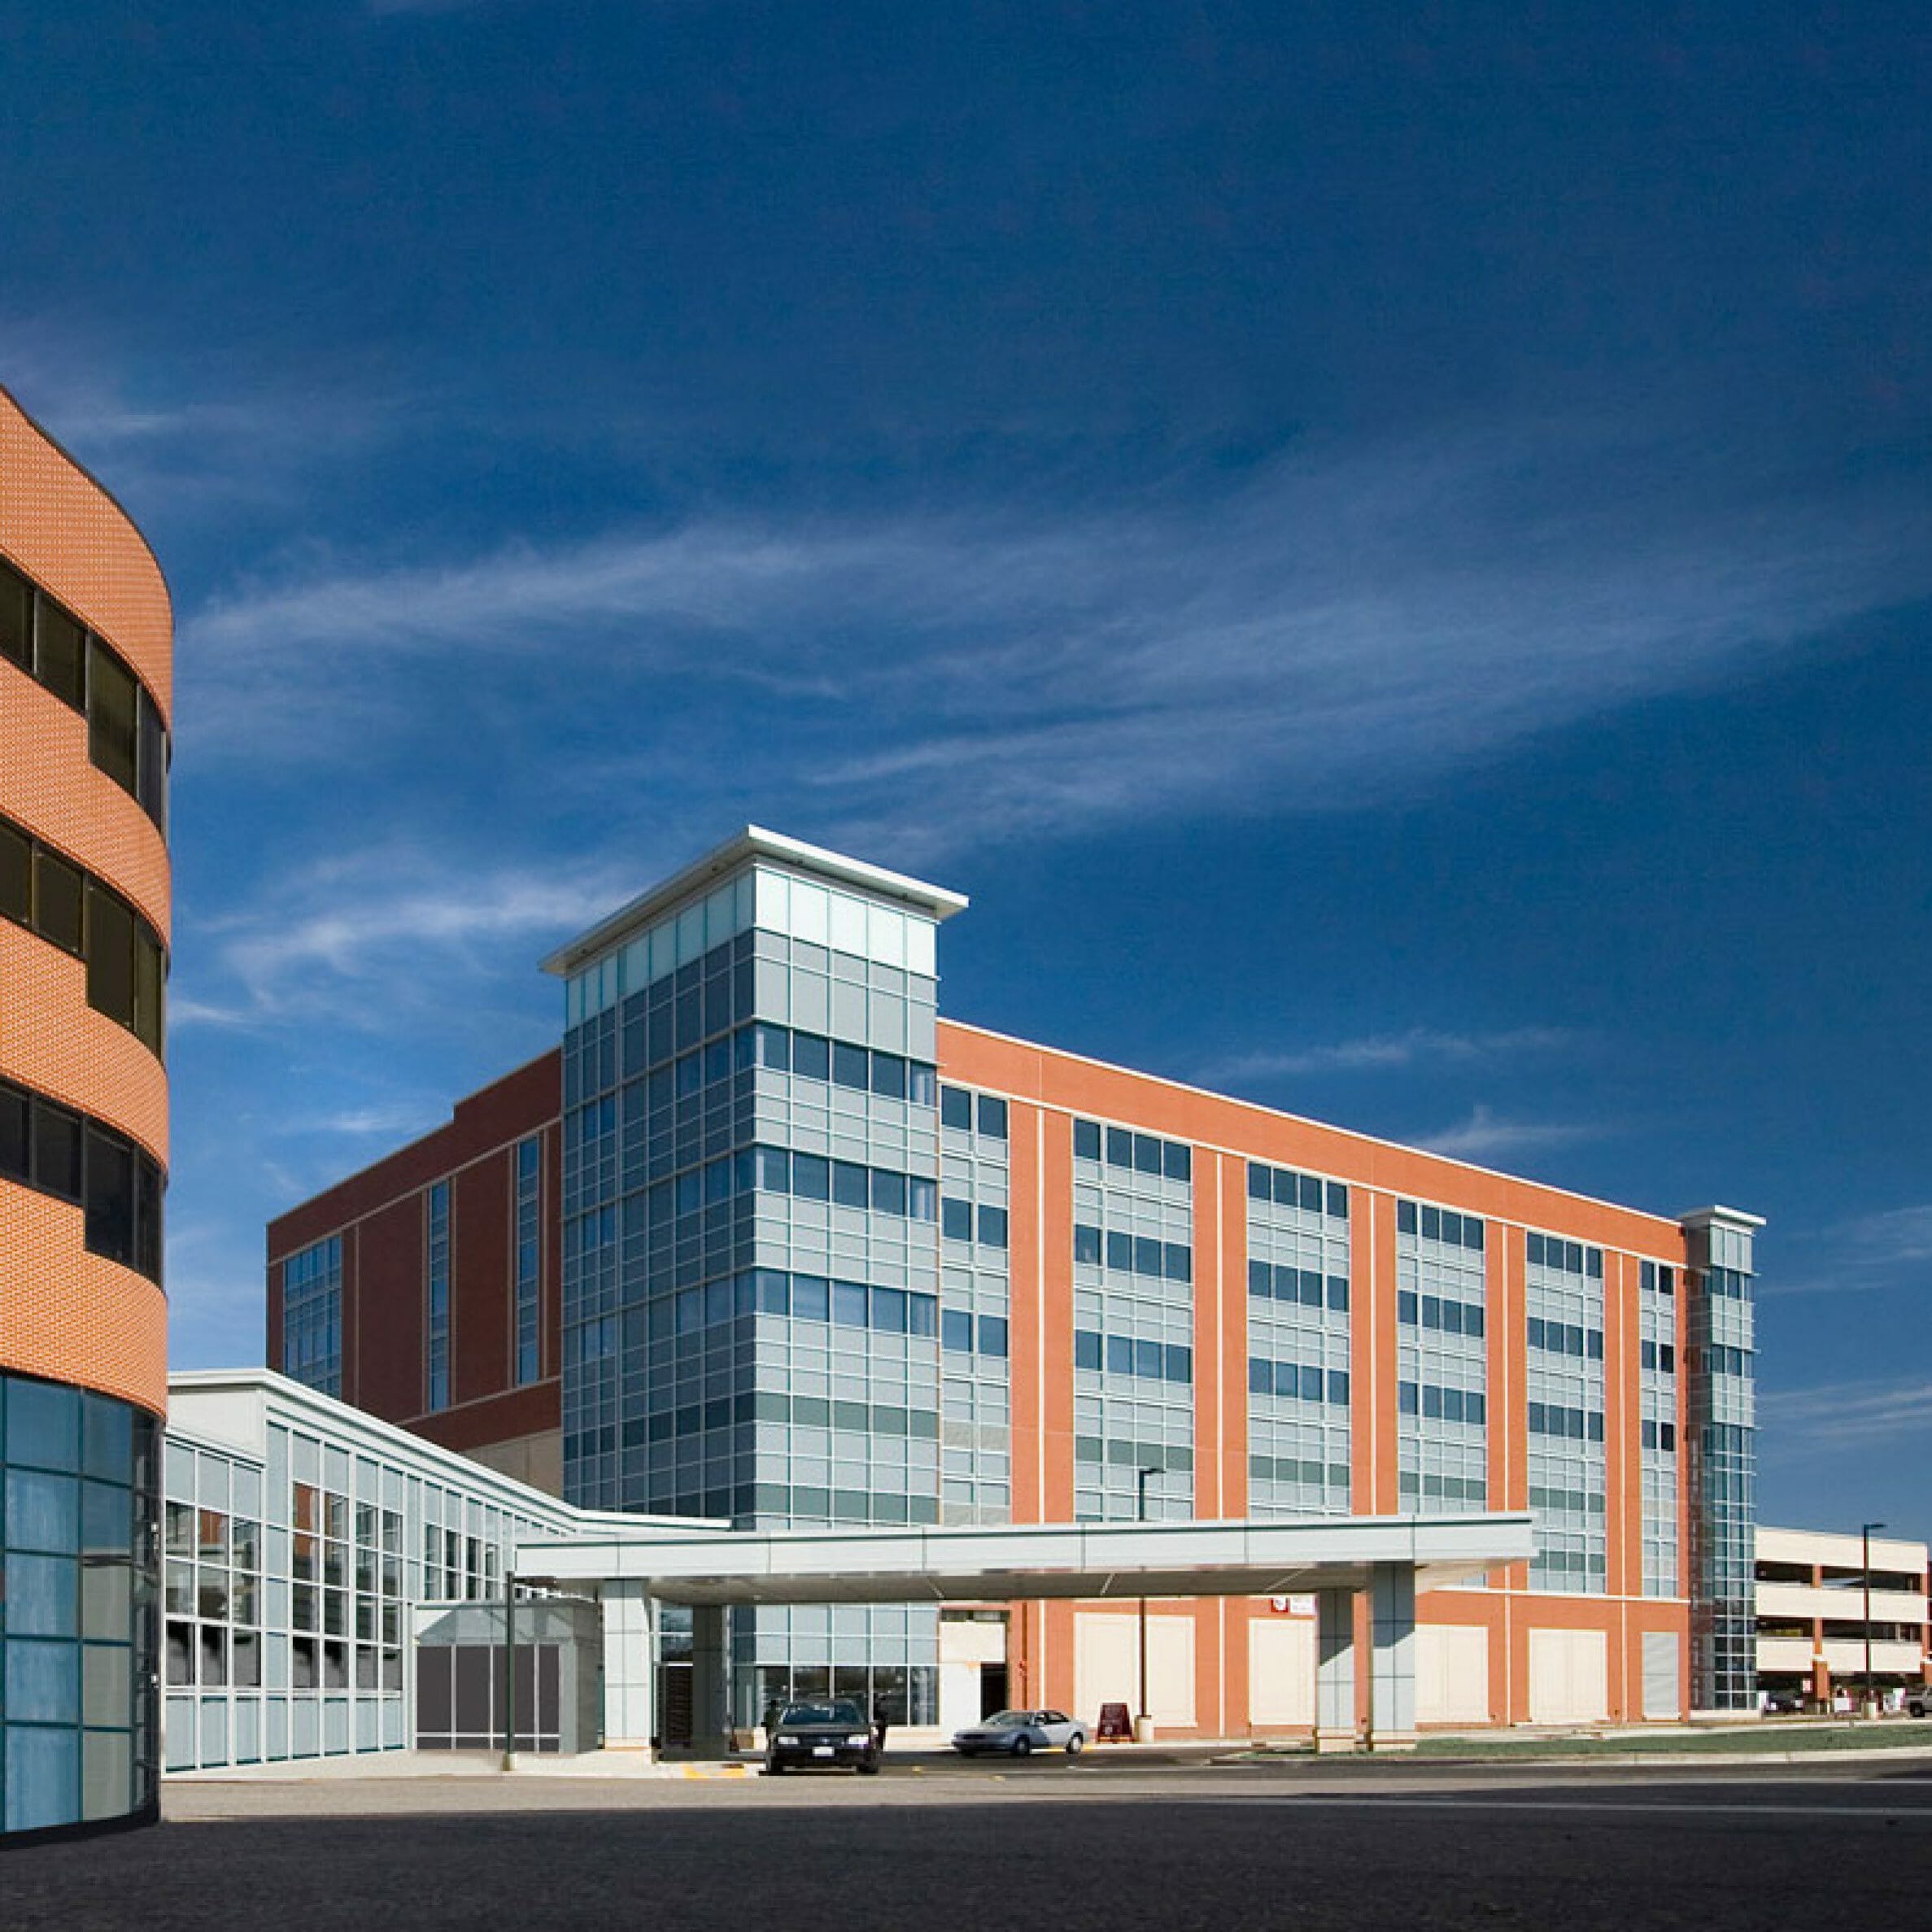 Exterior of multi-story brick and glass medical building with a porte-cochère and two cars under it